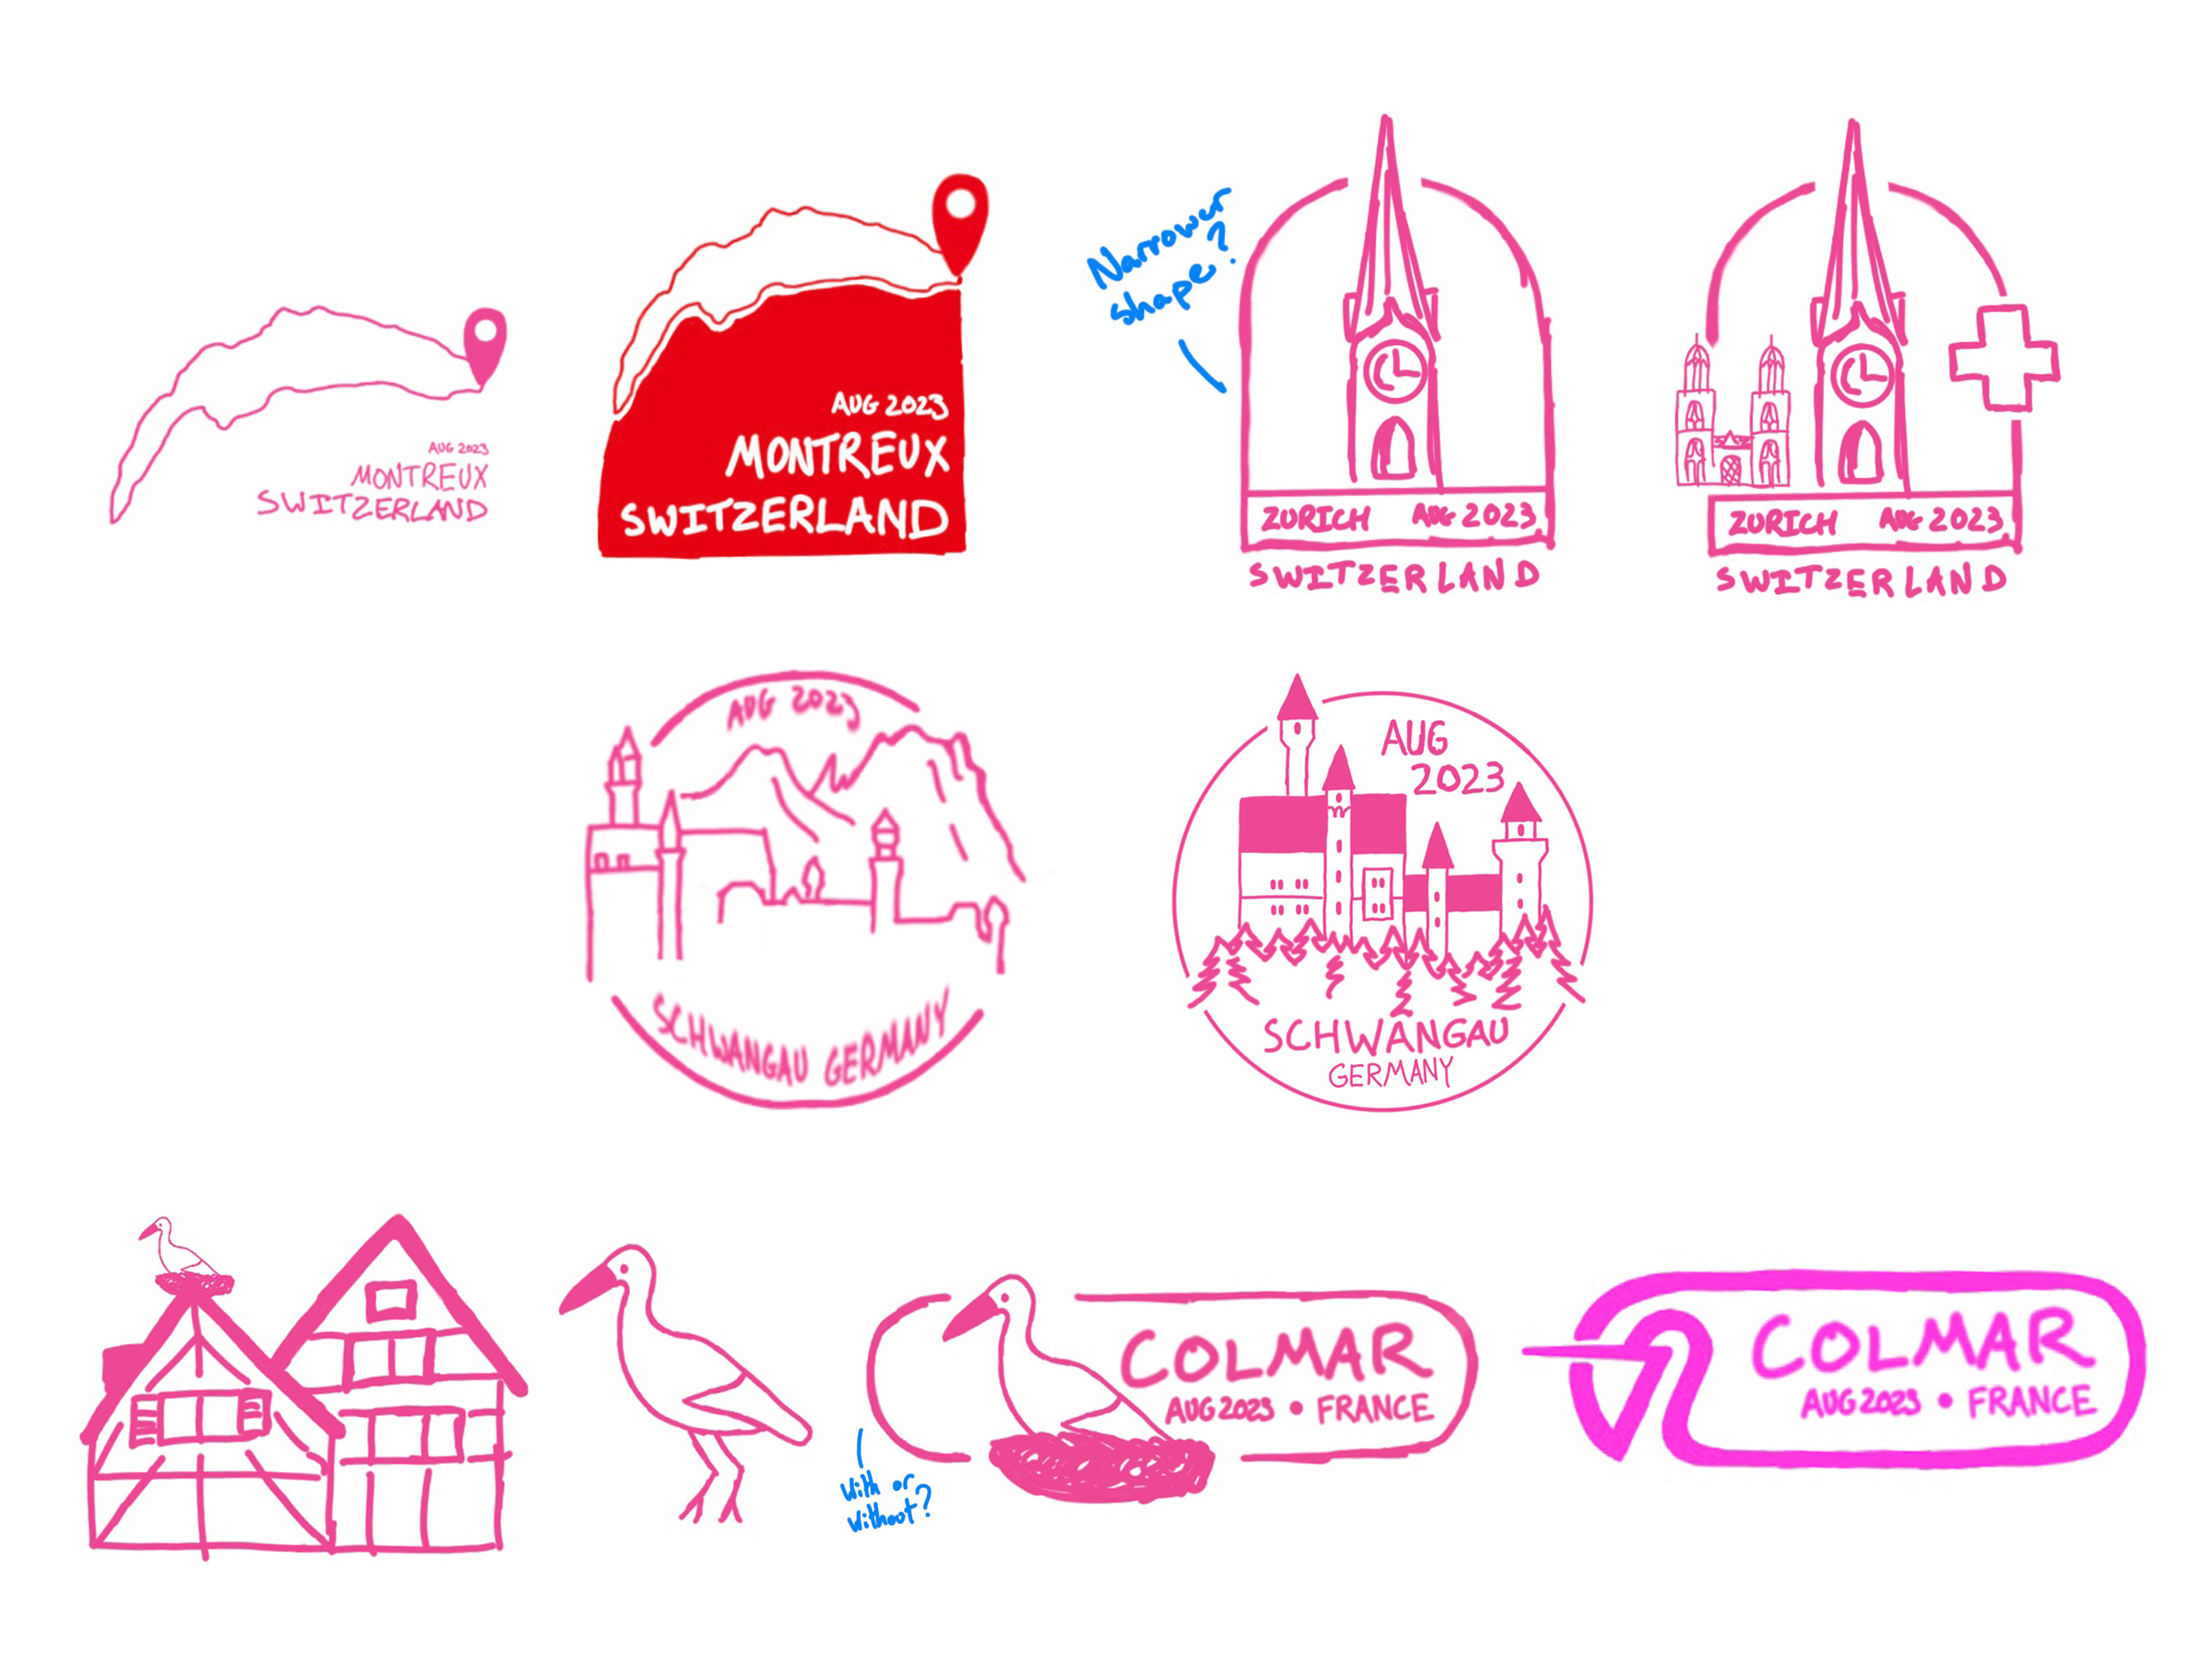 Sketches of the Montreux, Schwangau, Zurich and Colmar stamps